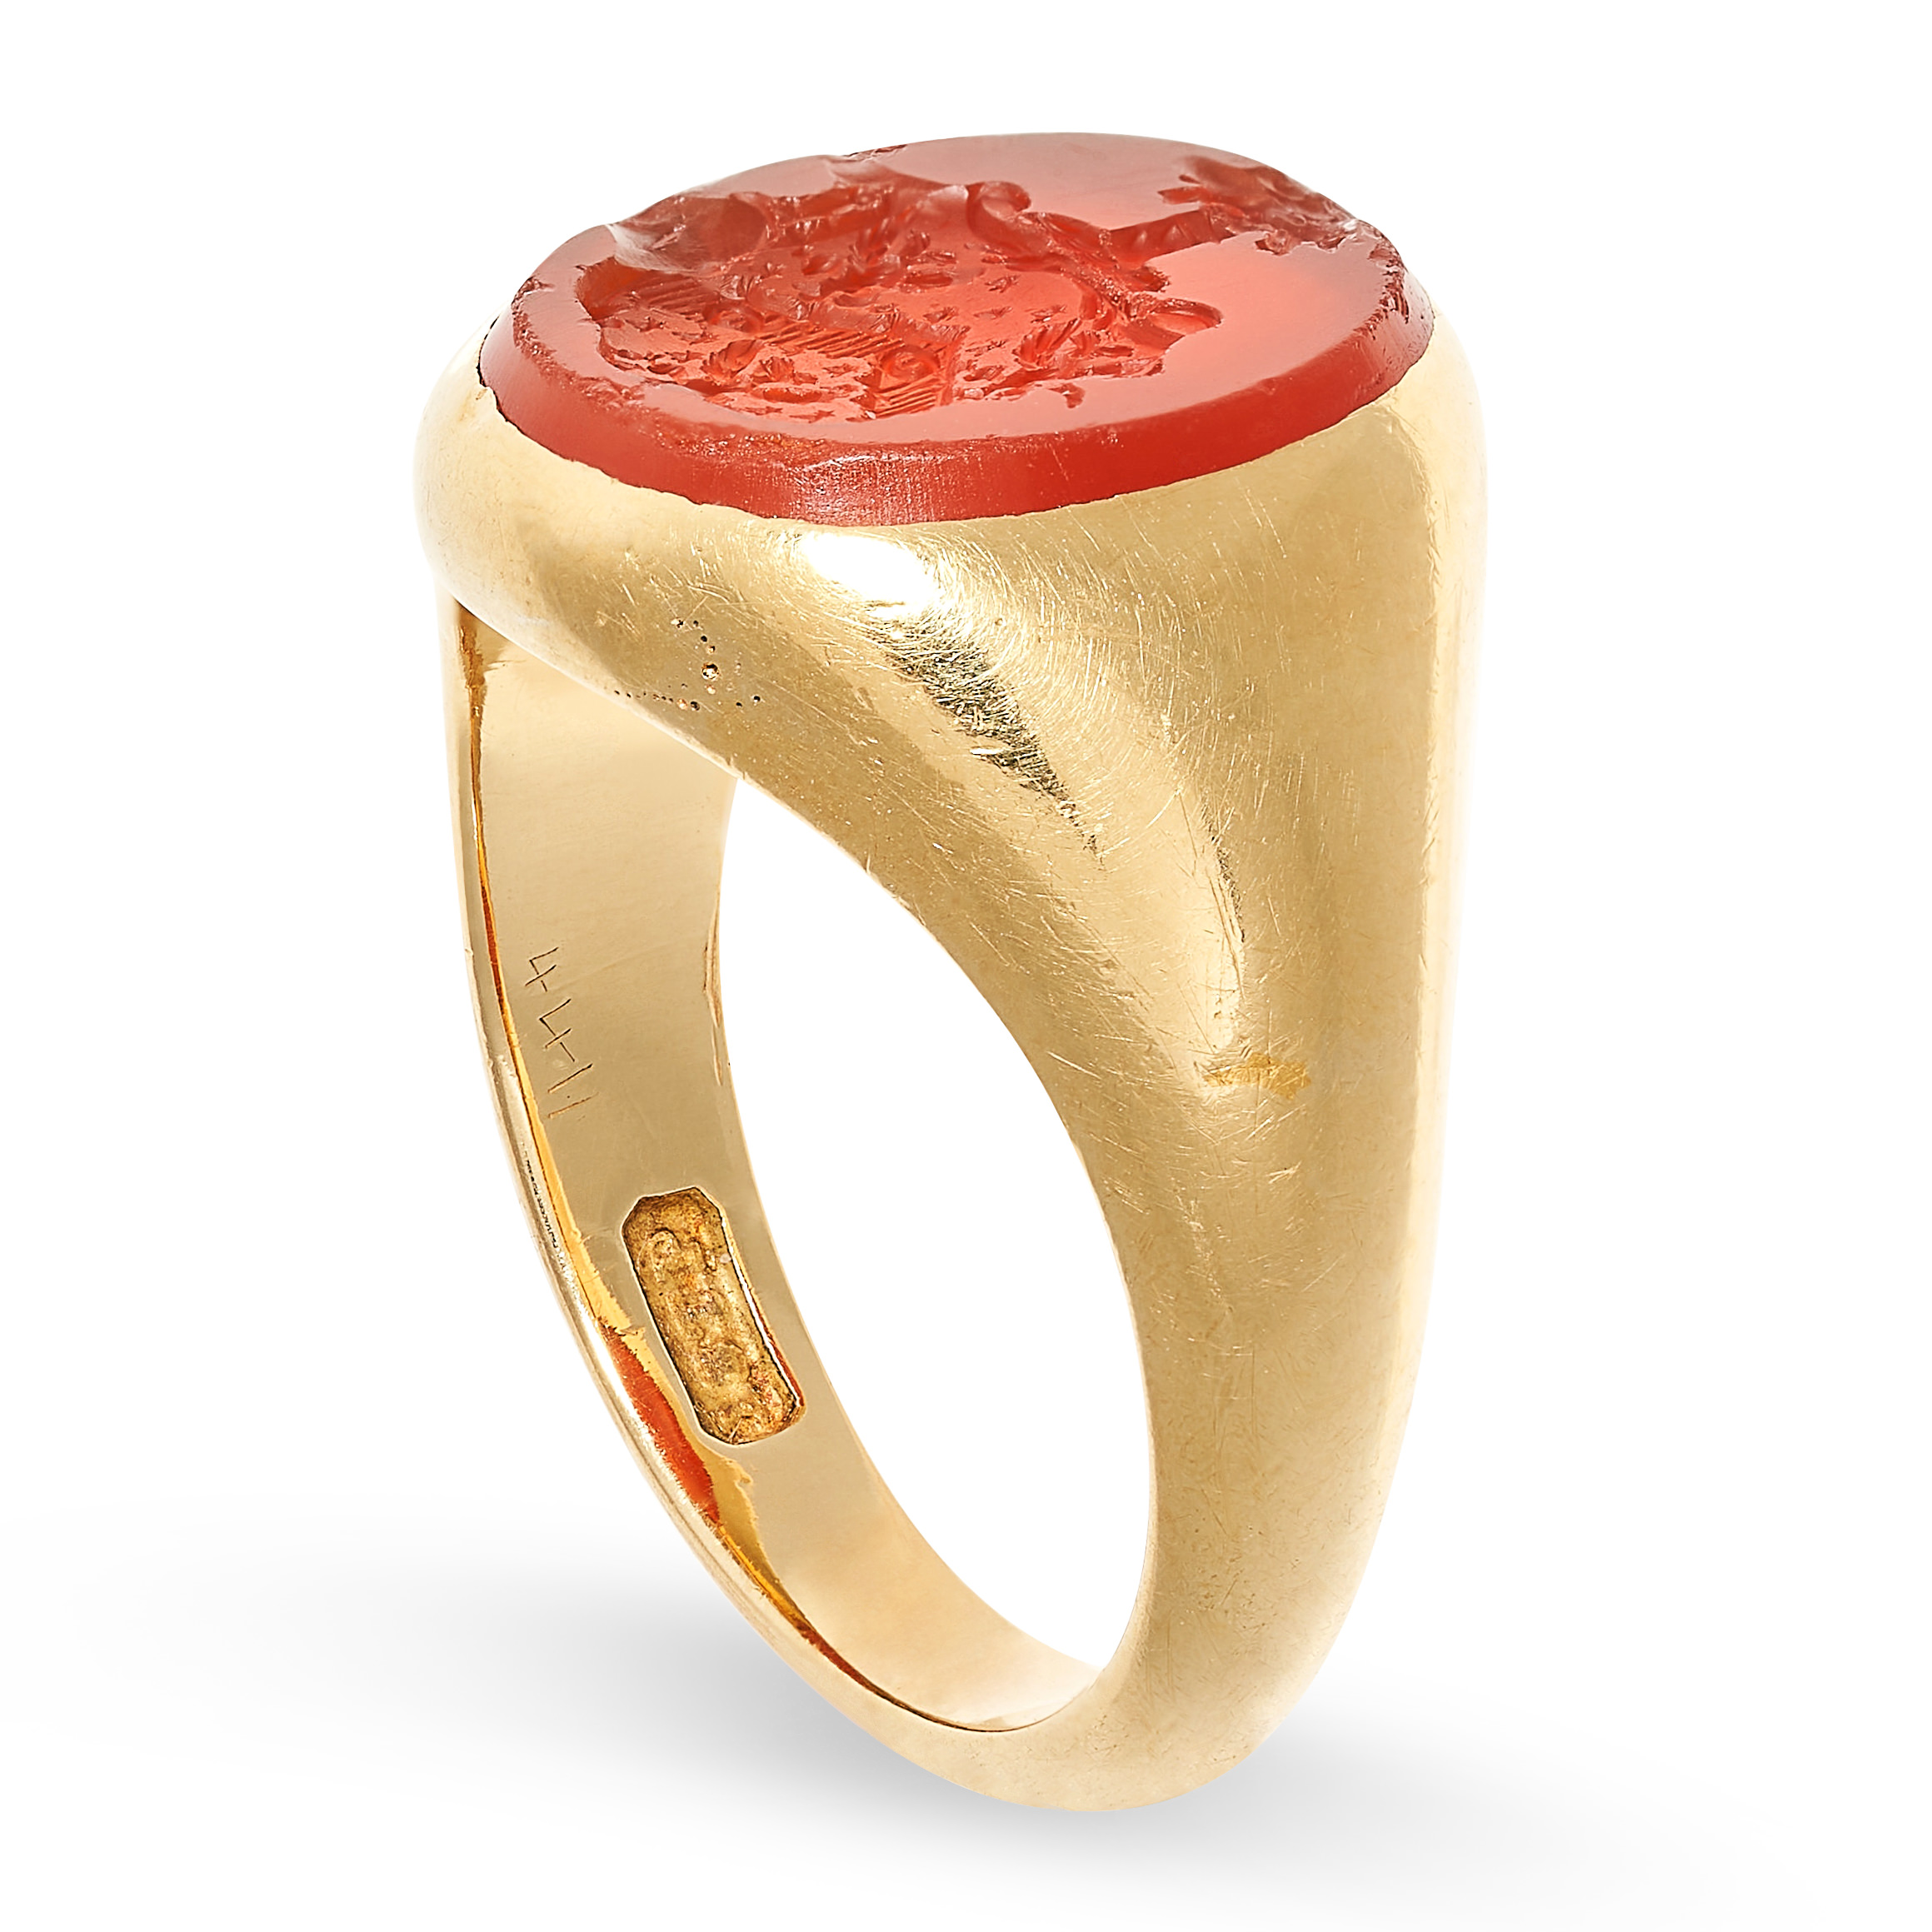 A VINTAGE CARNELIAN INTAGLIO SIGNET RING in 18ct yellow gold, set with a carnelian intaglio carved - Image 2 of 2